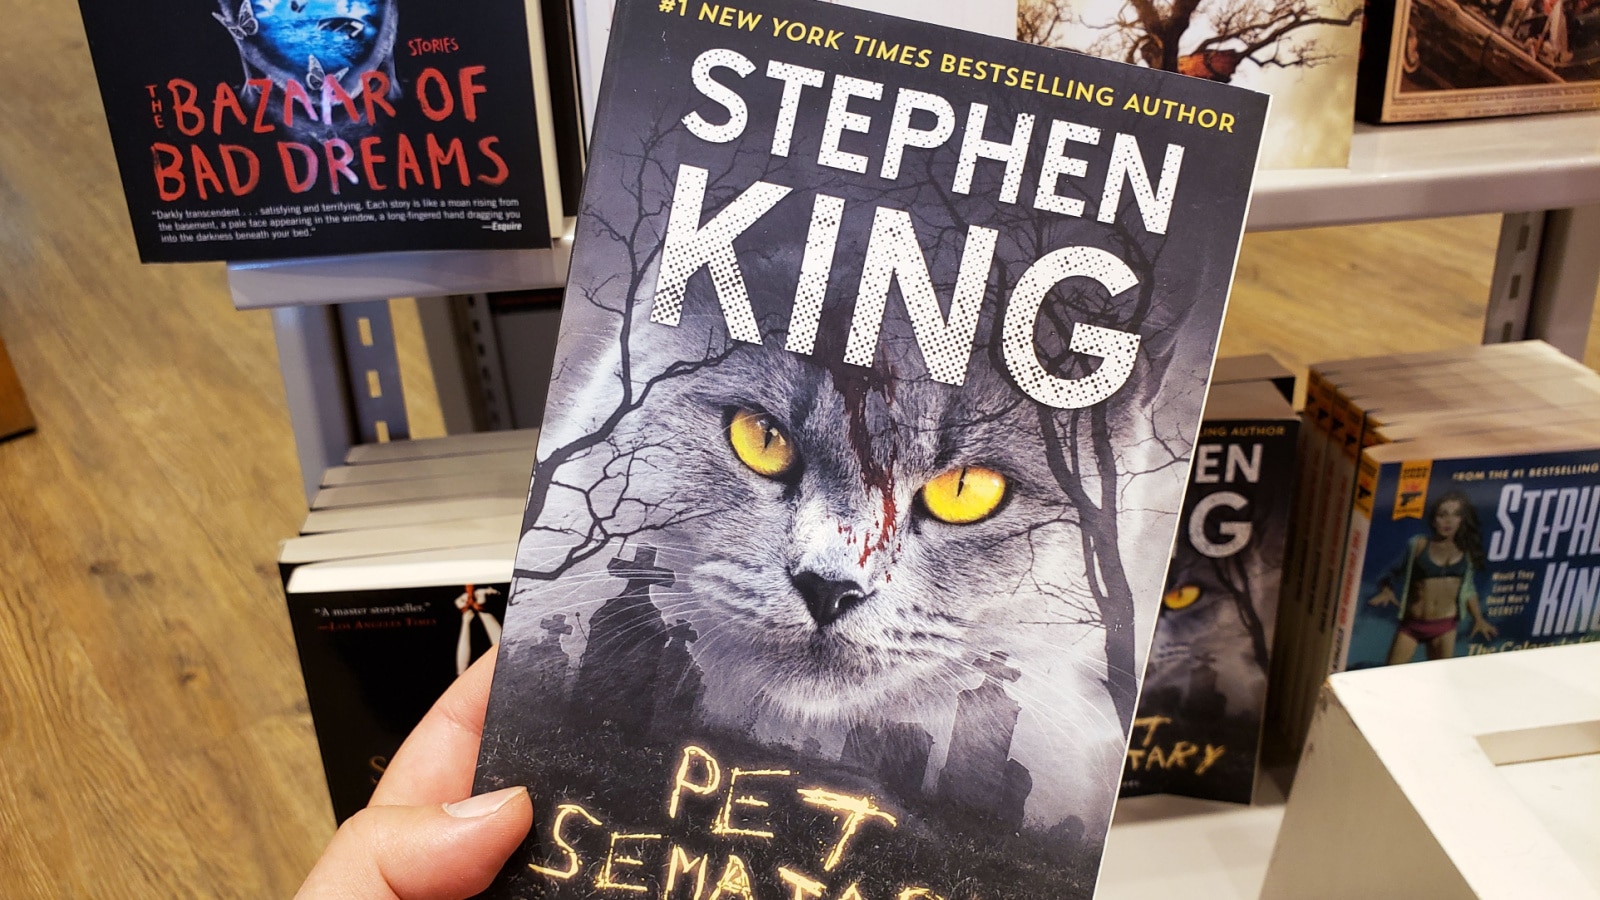 Montreal, Canada - October 23, 2019: A hand holding a Stephen King book Pet Sematary. Stephen King is an American famous author of supernatural fiction, horror and fantasy novels.